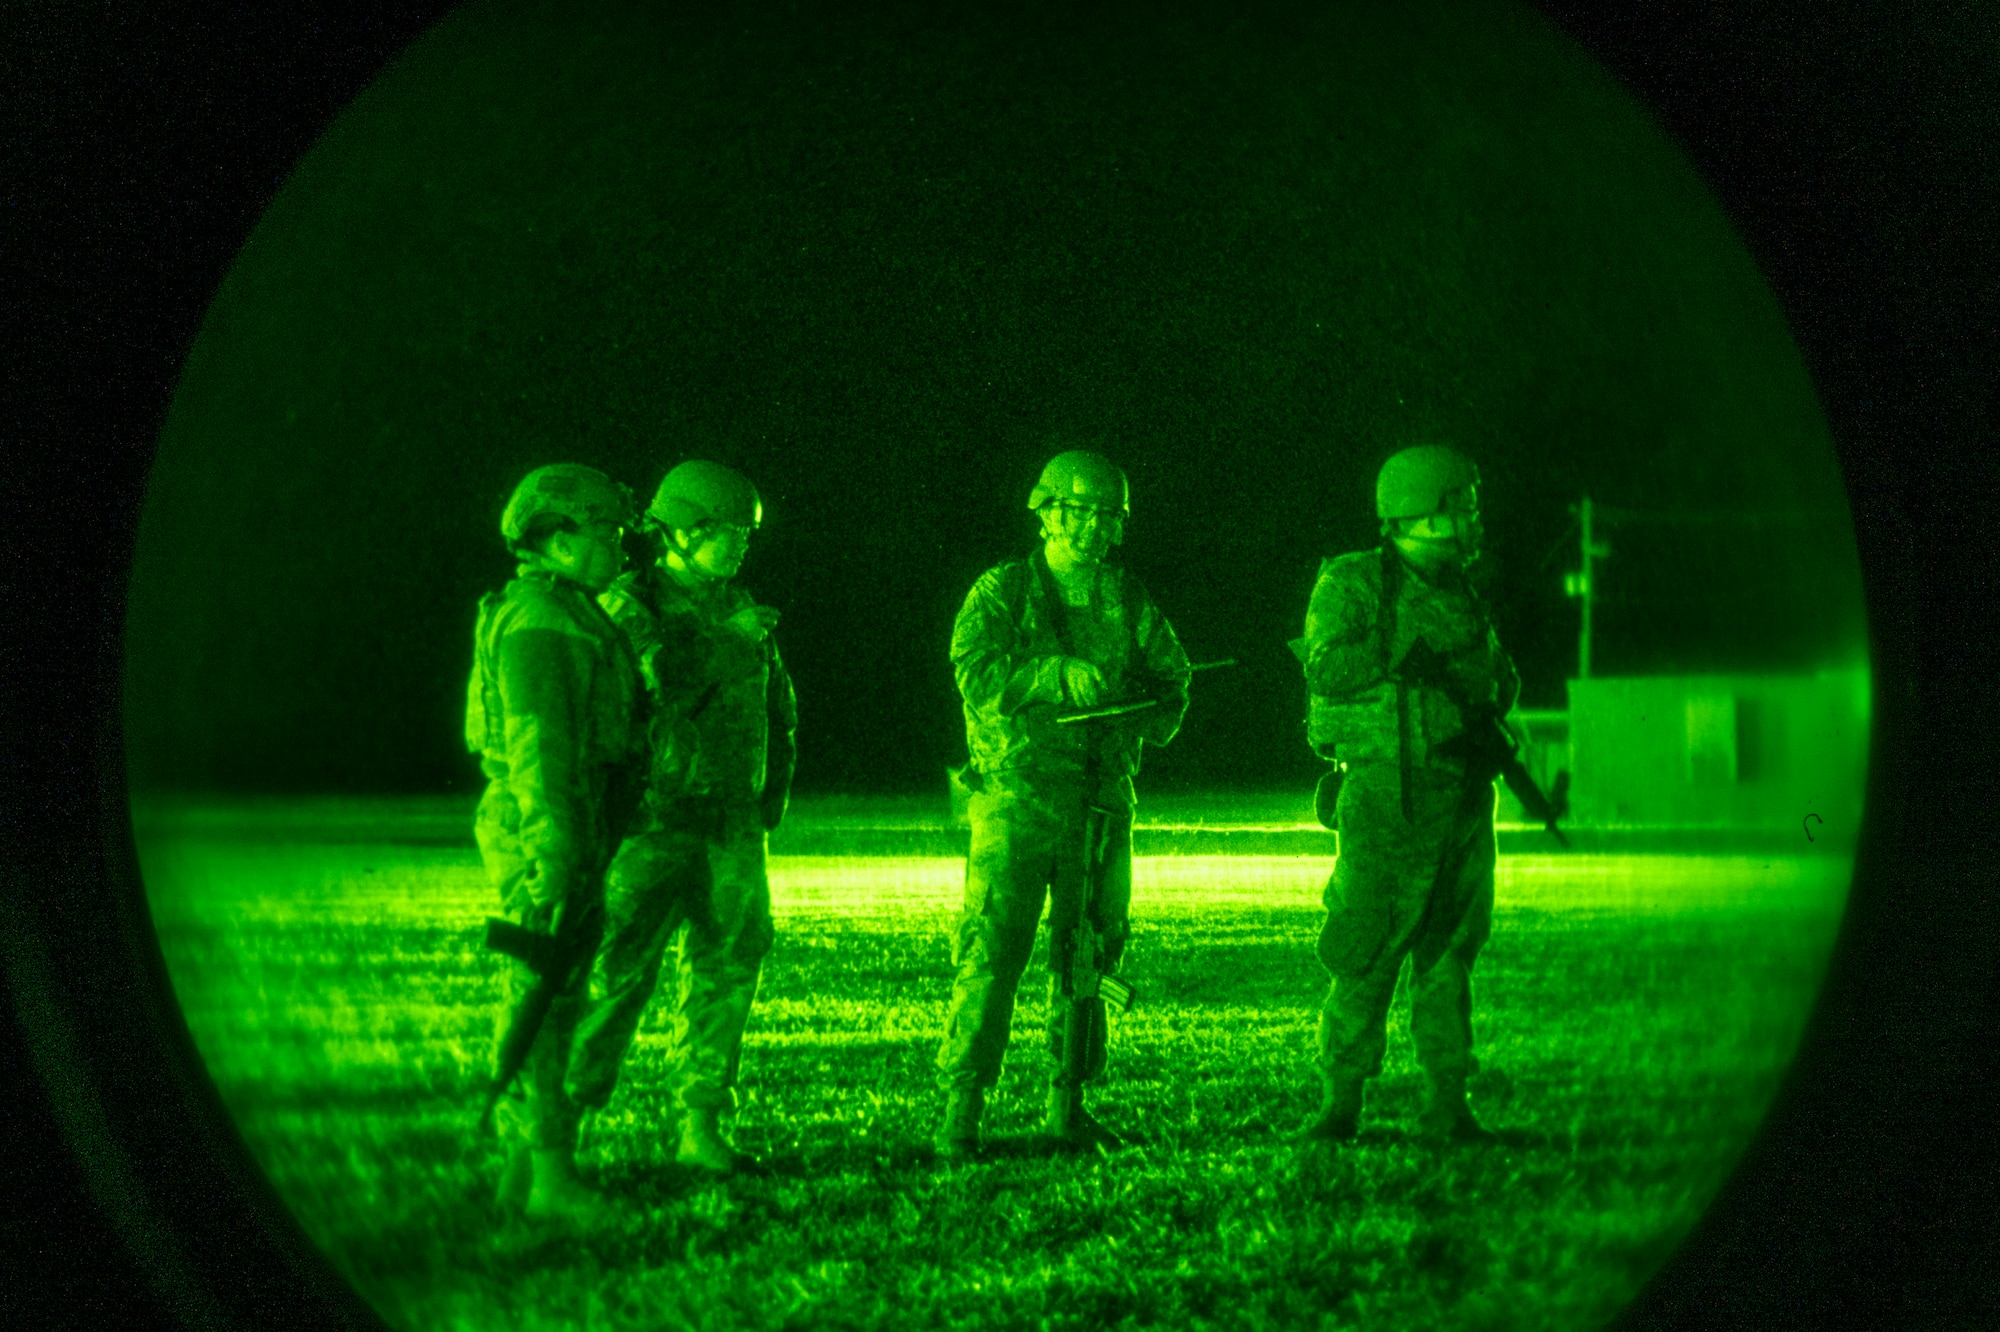 U.S. Air Force Airmen assigned to the 23rd Wing stand guard during Exercise Ready Tiger 24-1 at Avon Park Air Force Range, Florida, April 11, 2024. Pararescuemen are highly trained special-warfare operators able to recover personnel and provide aid in any condition. Built upon Air Combat Command's directive to assert air power in contested environments, Exercise Ready Tiger 24-1 aims to test and enhance the 23rd Wing’s proficiency in executing Lead Wing and Expeditionary Air Base concepts through Agile Combat Employment and command and control operations. (U.S. Air Force photo by Airman 1st Class Leonid Soubbotine)